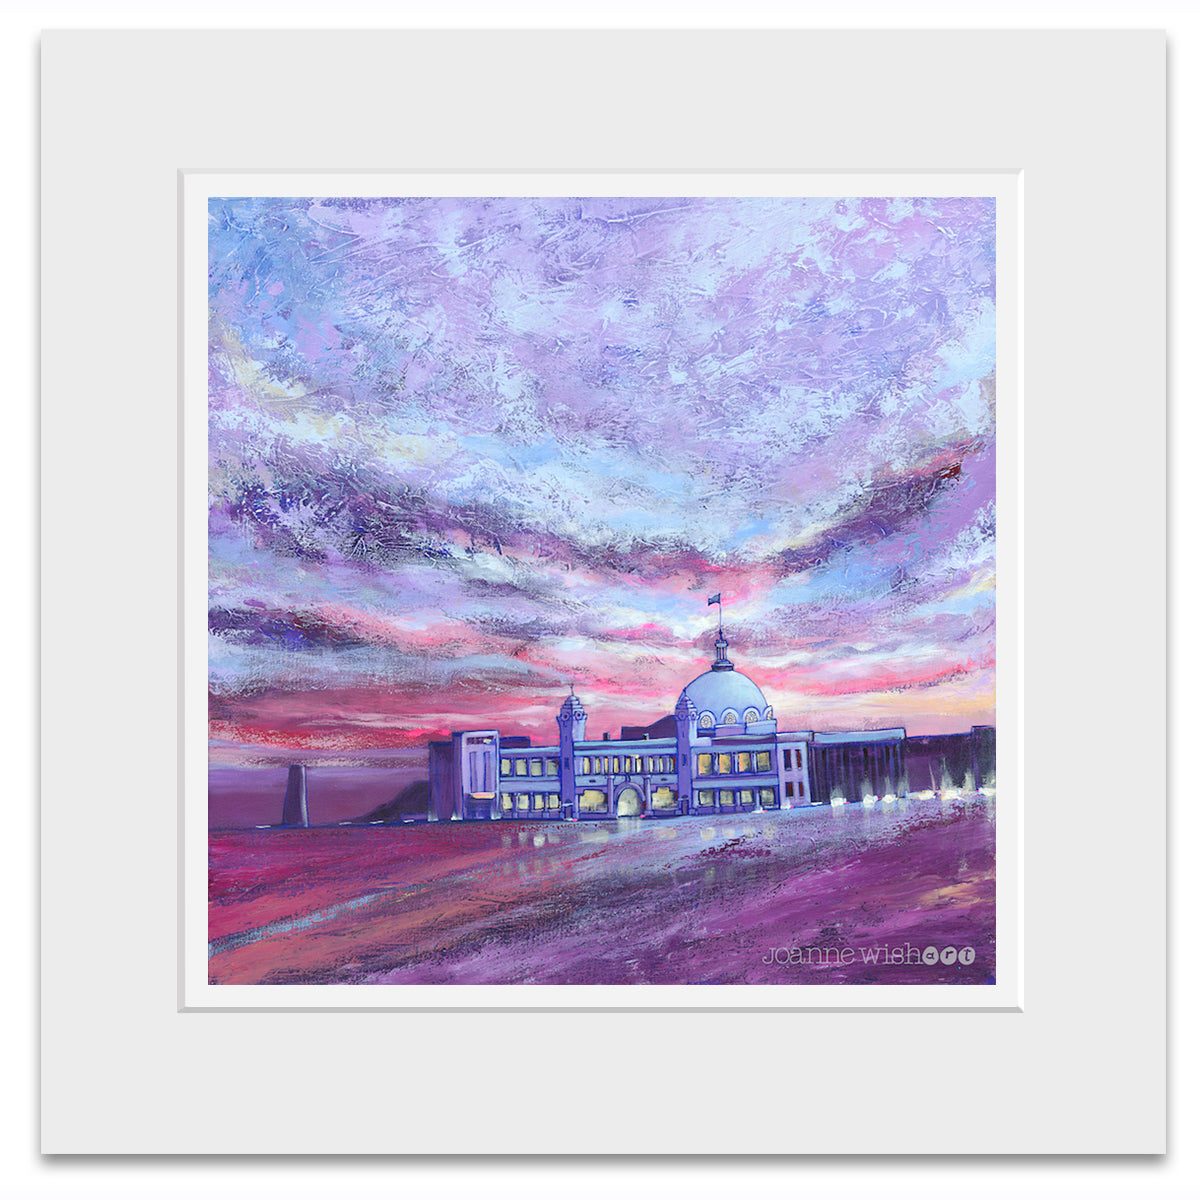 A mounted print of the Iconic whitley bay dome with a dramatic purple skyline.